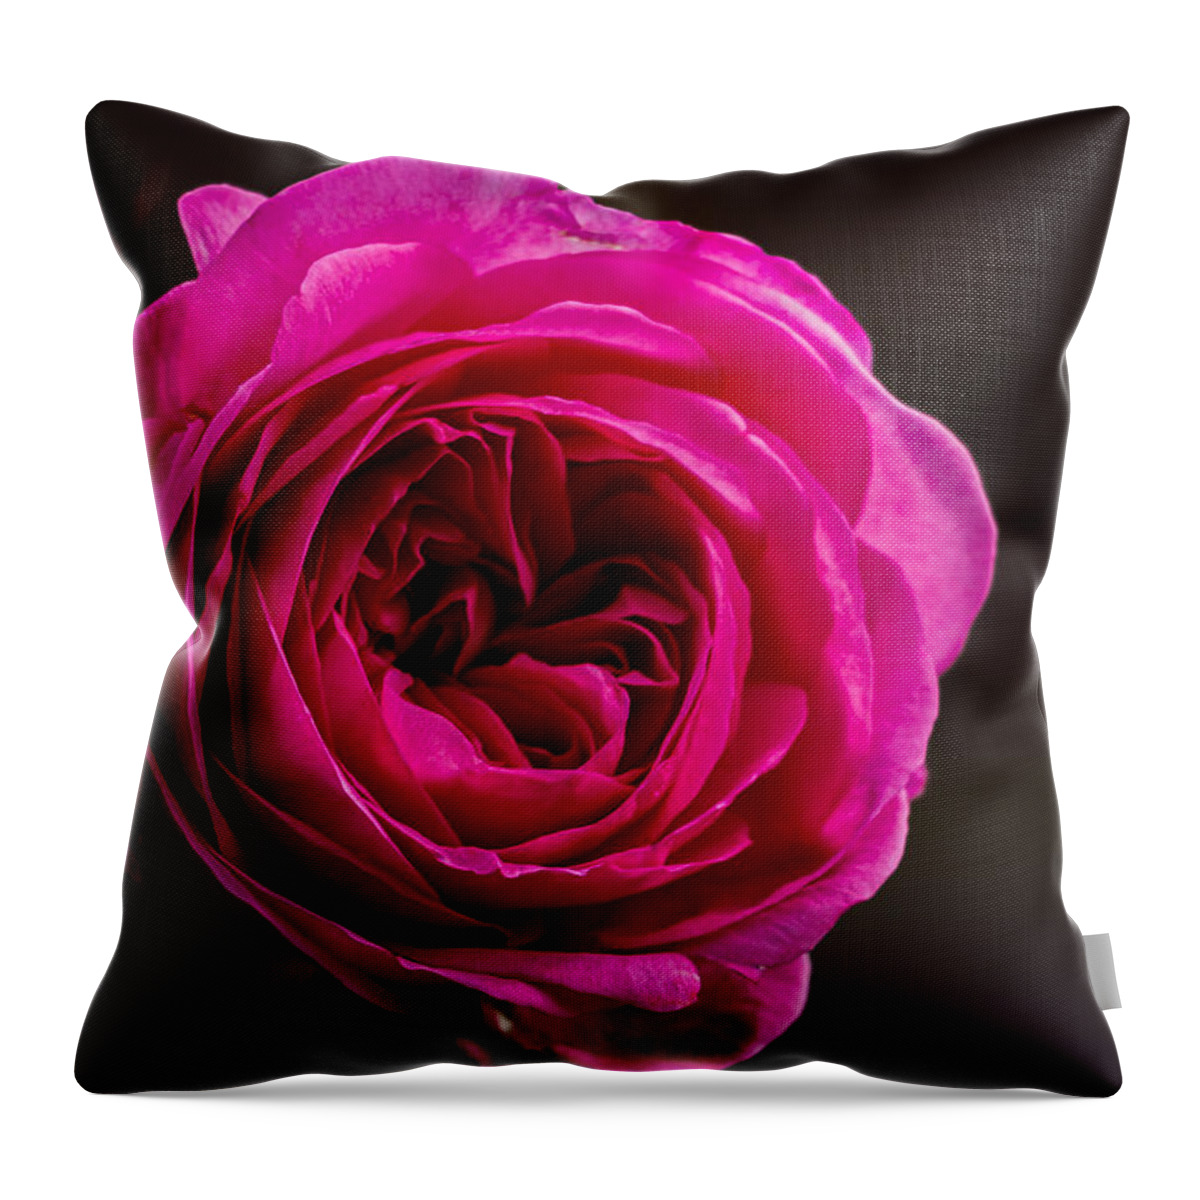 Rose Throw Pillow featuring the photograph Quiet Man Rose by Carrie Hannigan